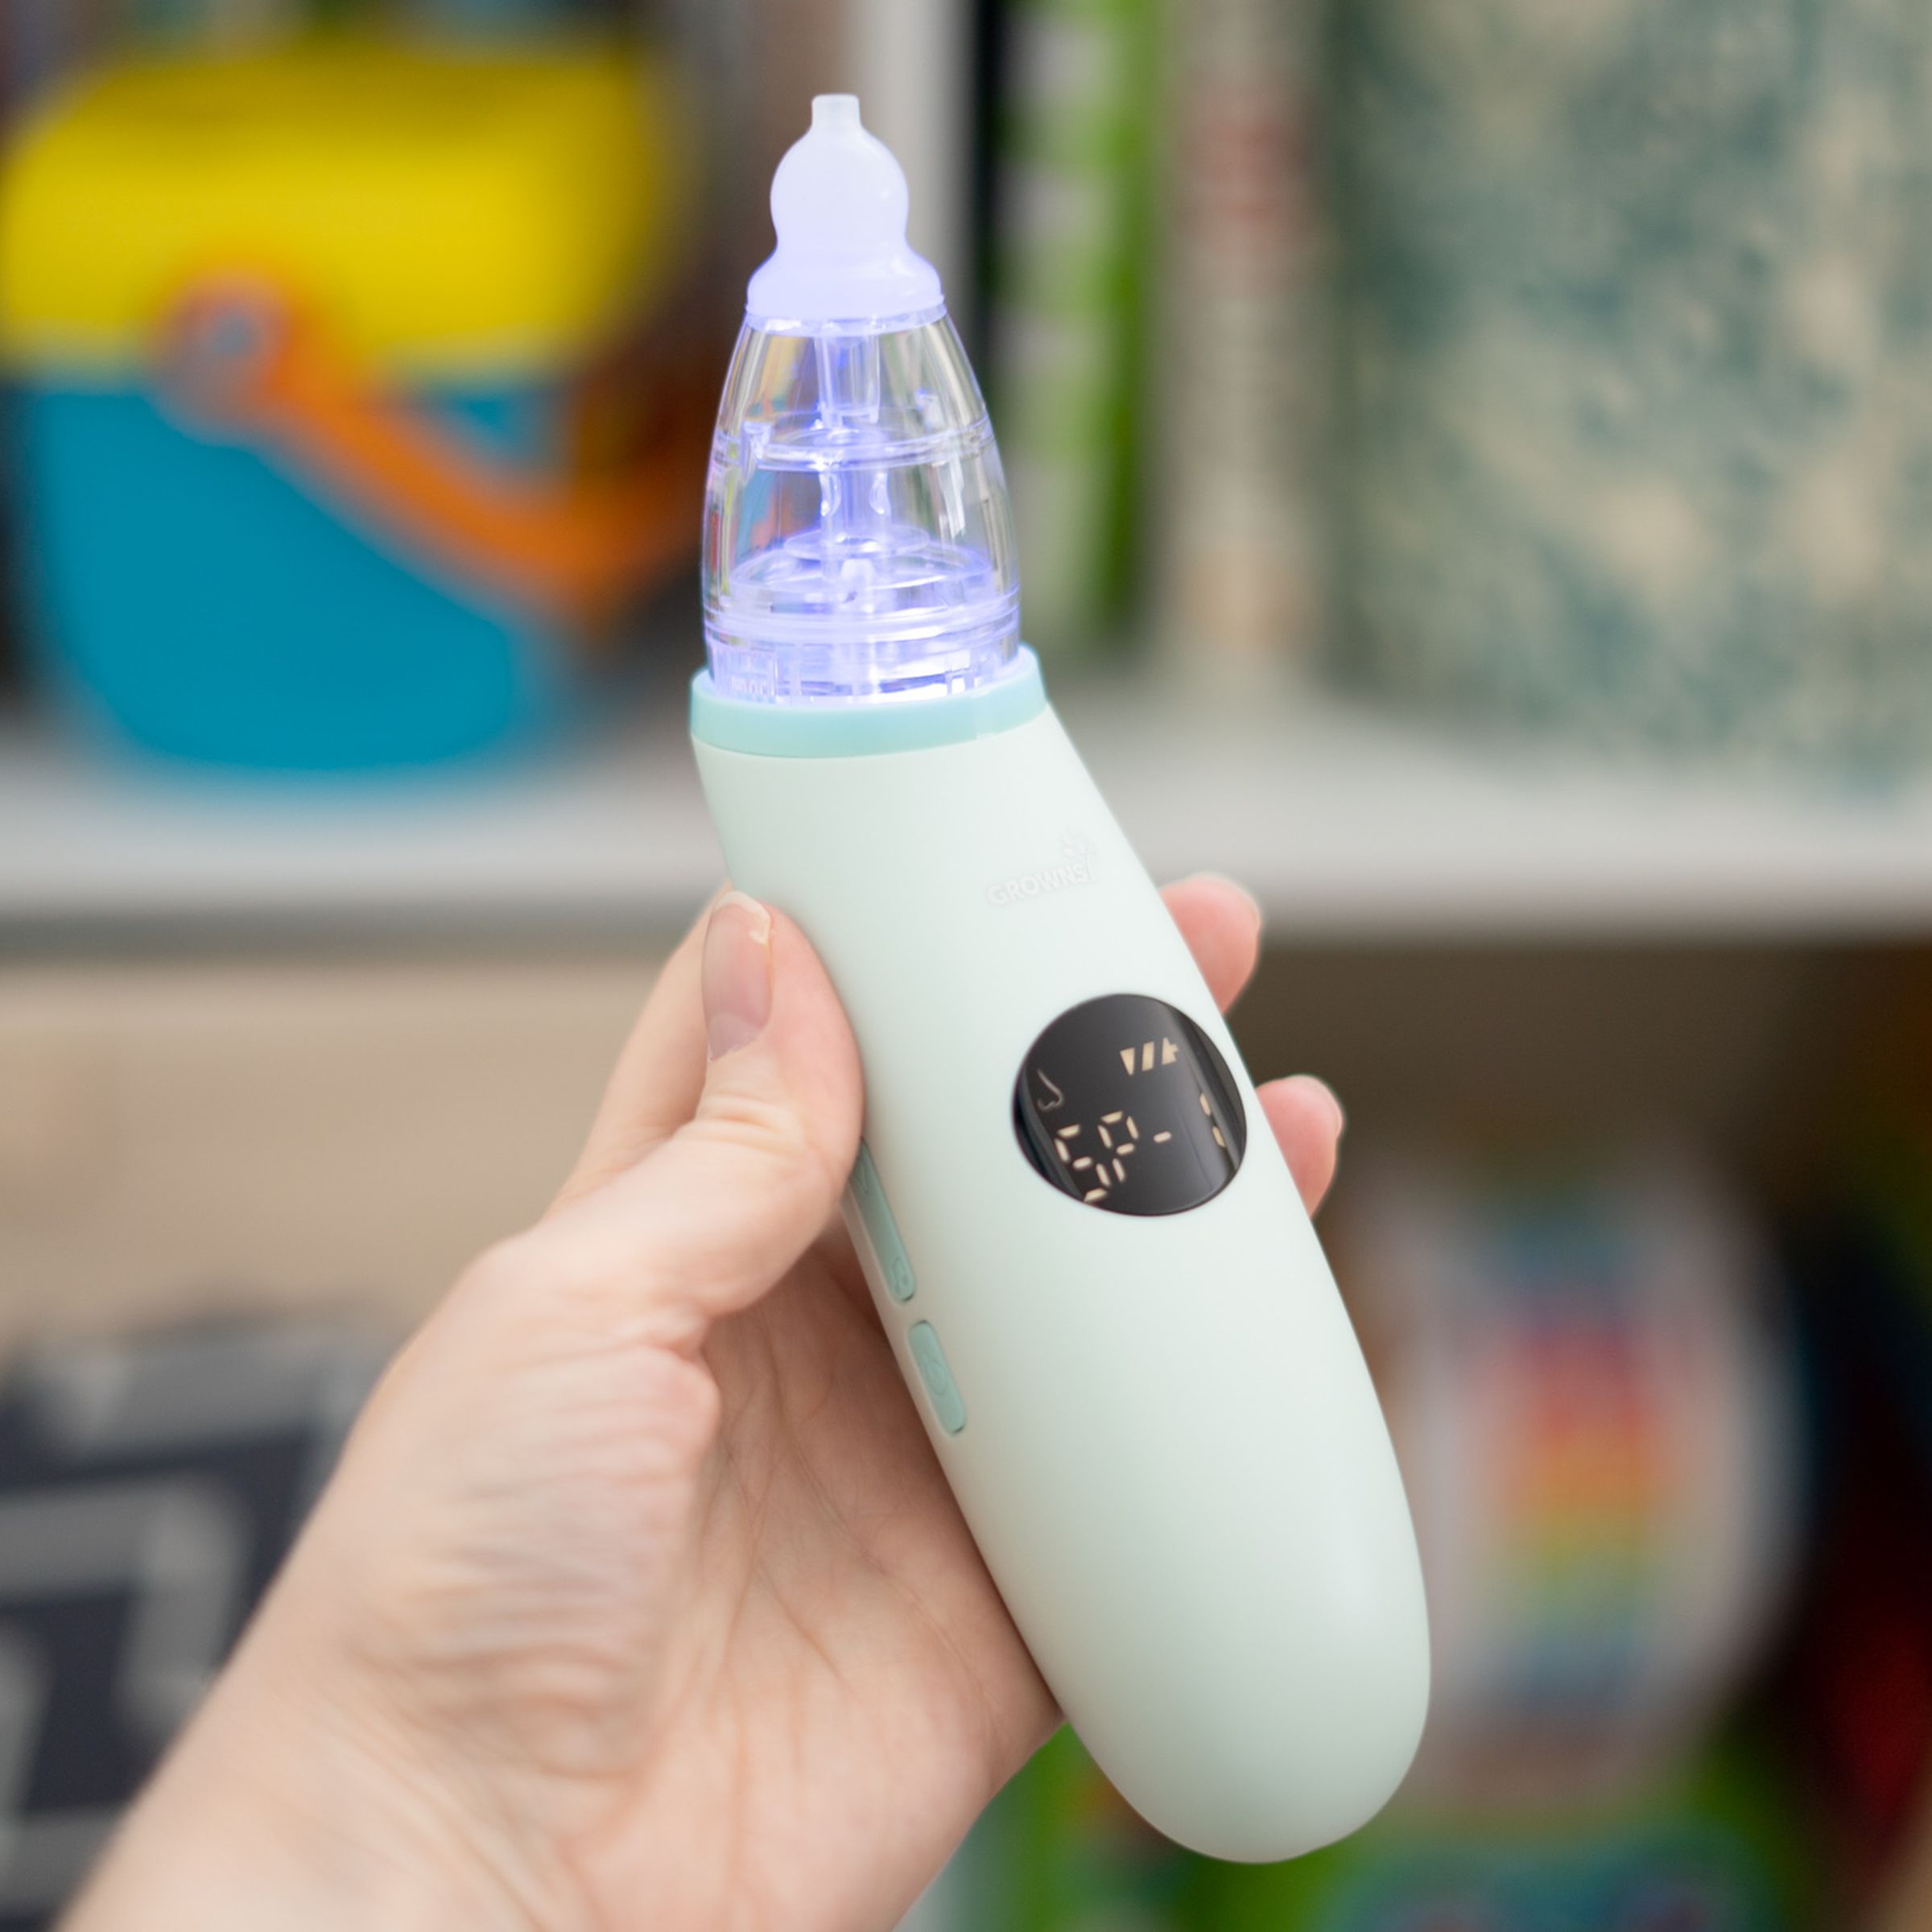 Hand holding a nasal aspirator in front of a colorful background of childrens’ toys and books.